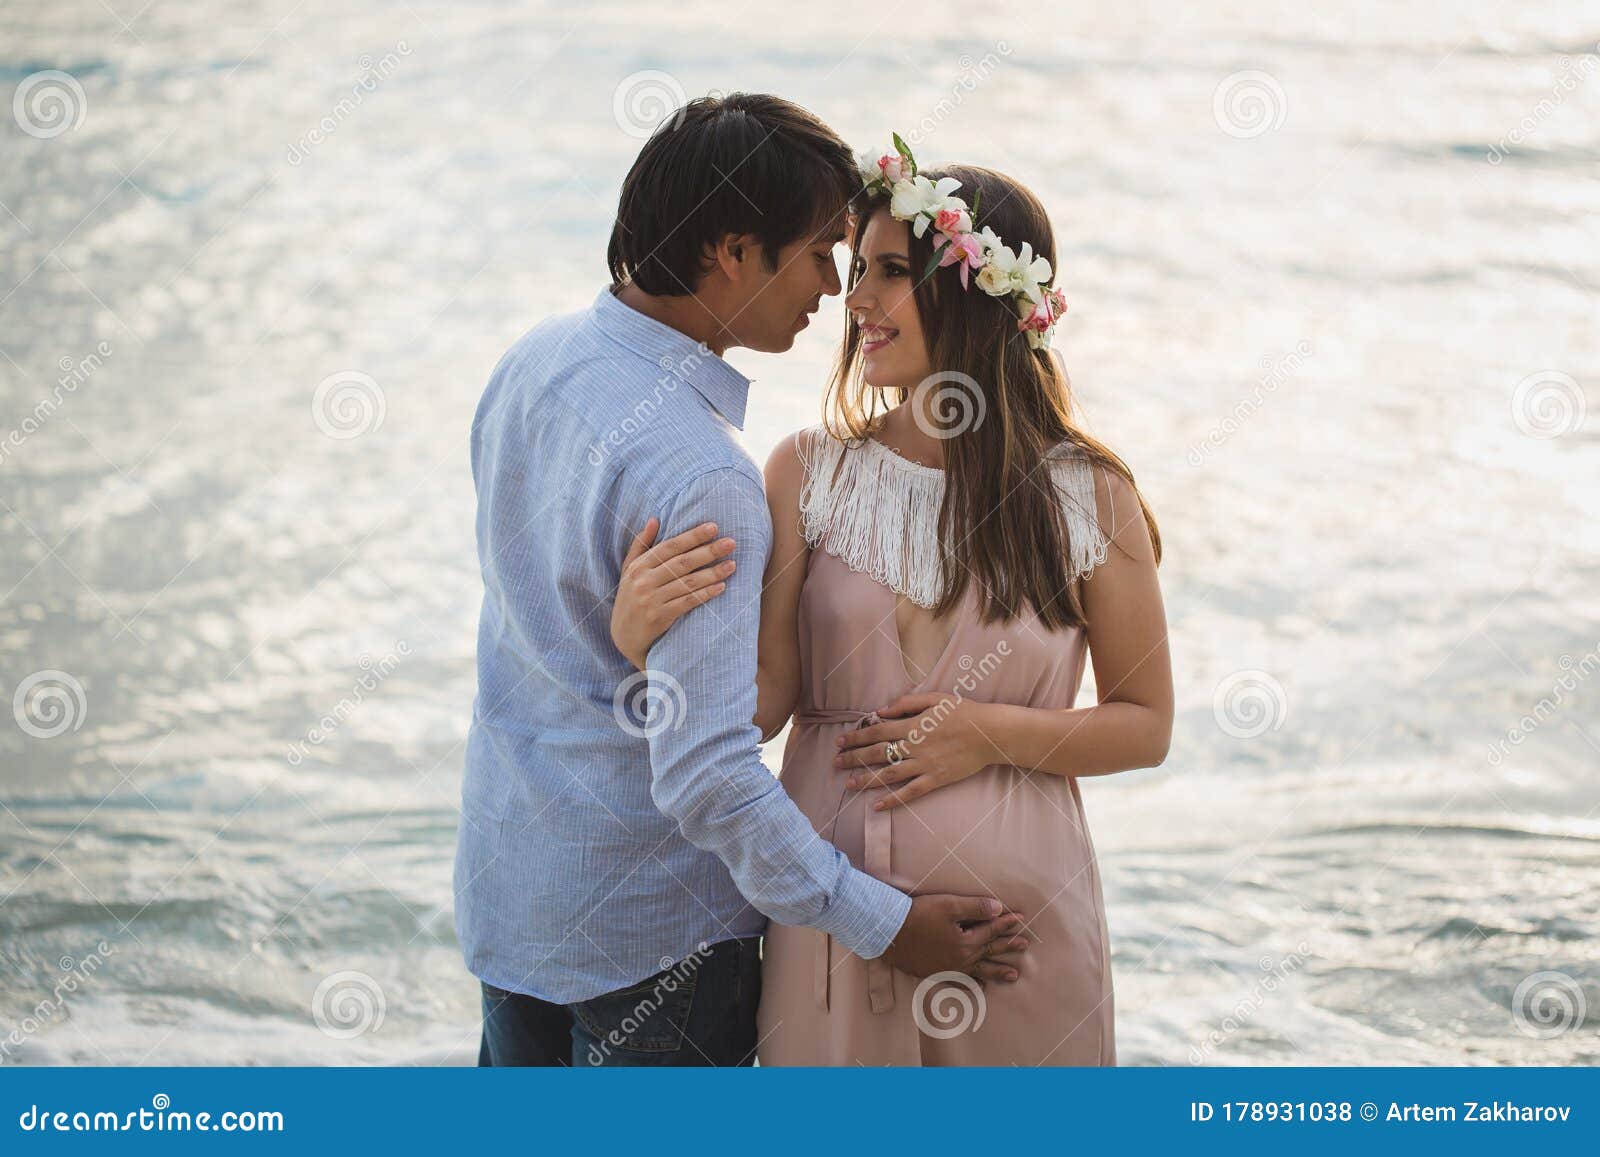 Beautiful Pregnant Girl And Man On The Beach. Stock Photo ...